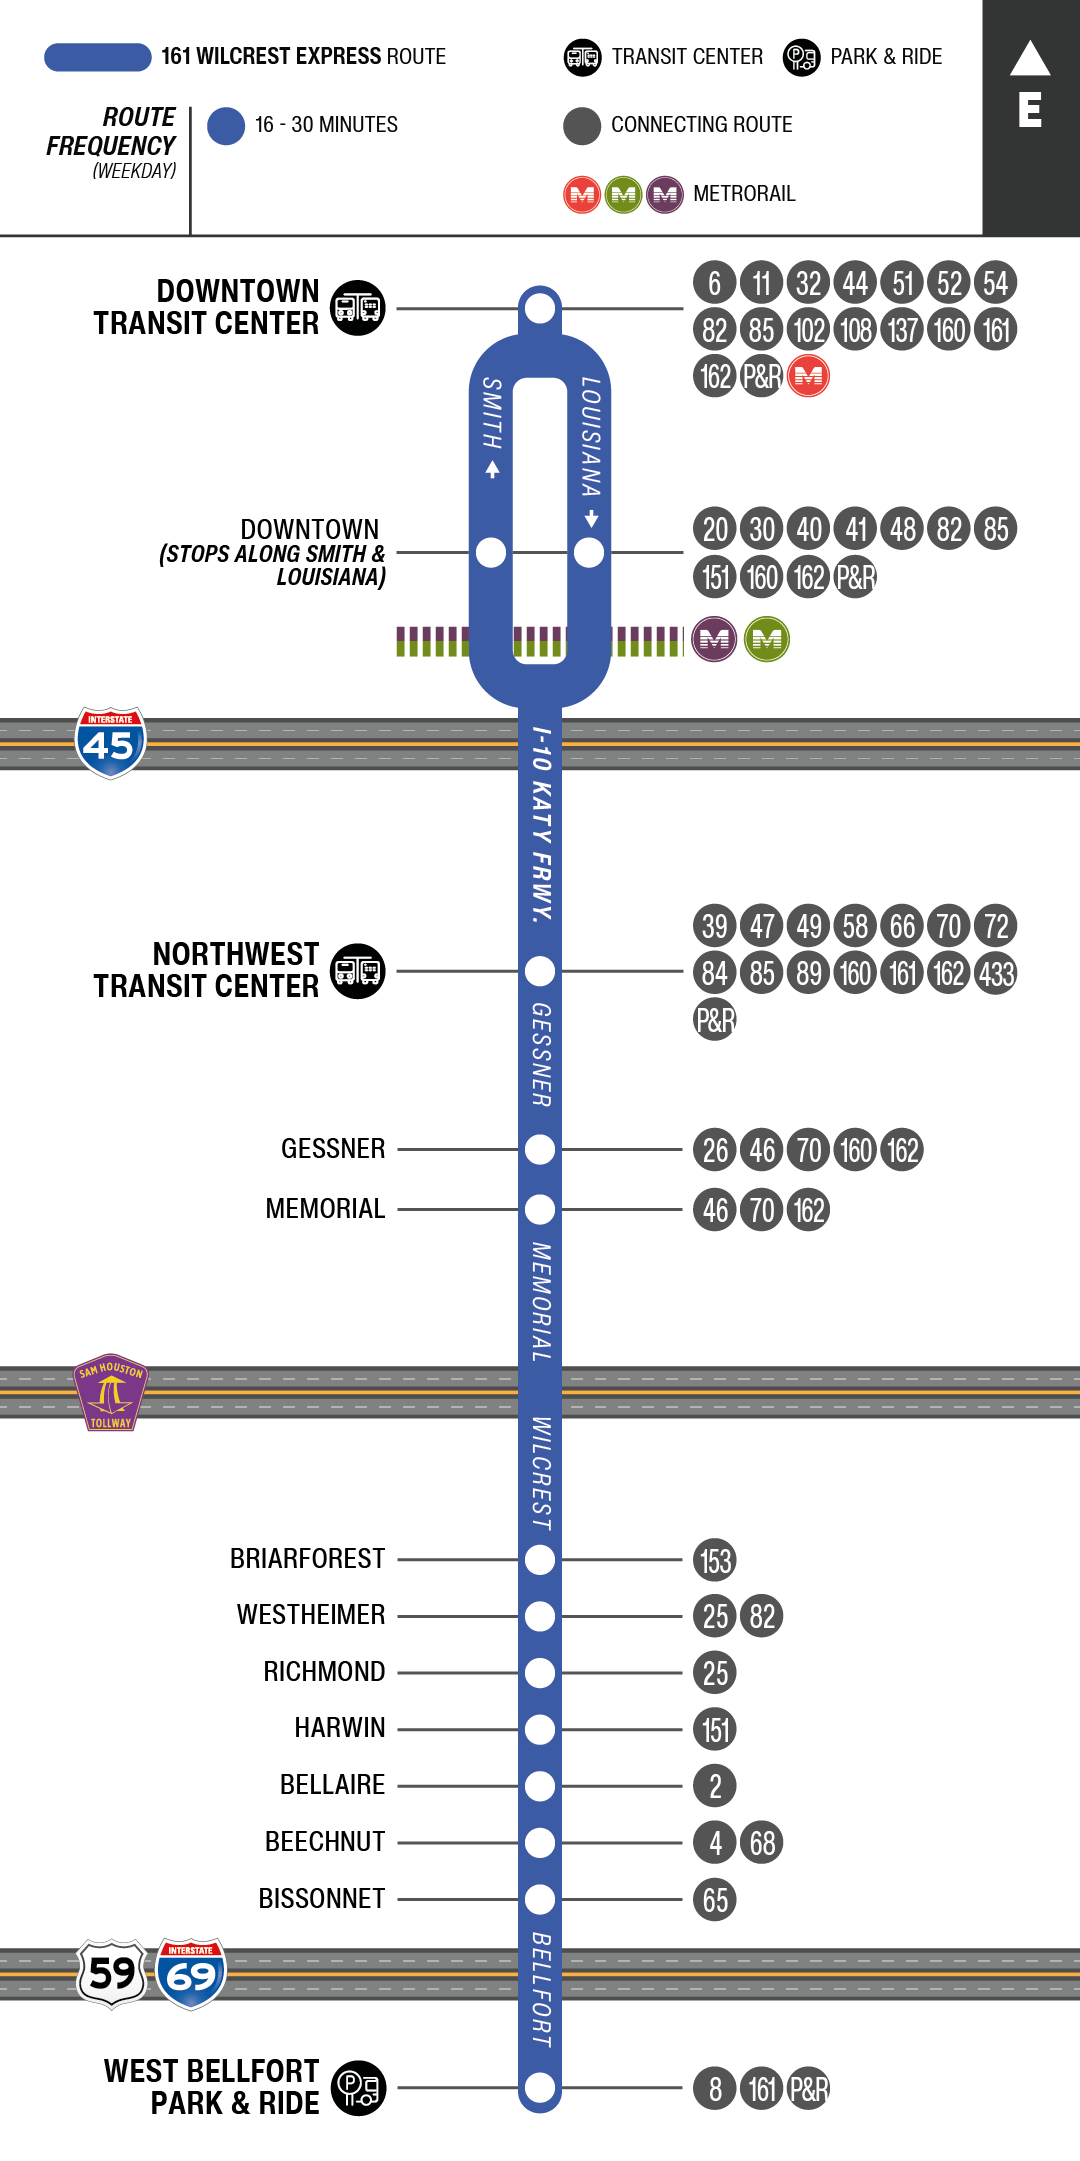 Route map for 161 Wilcrest Express bus